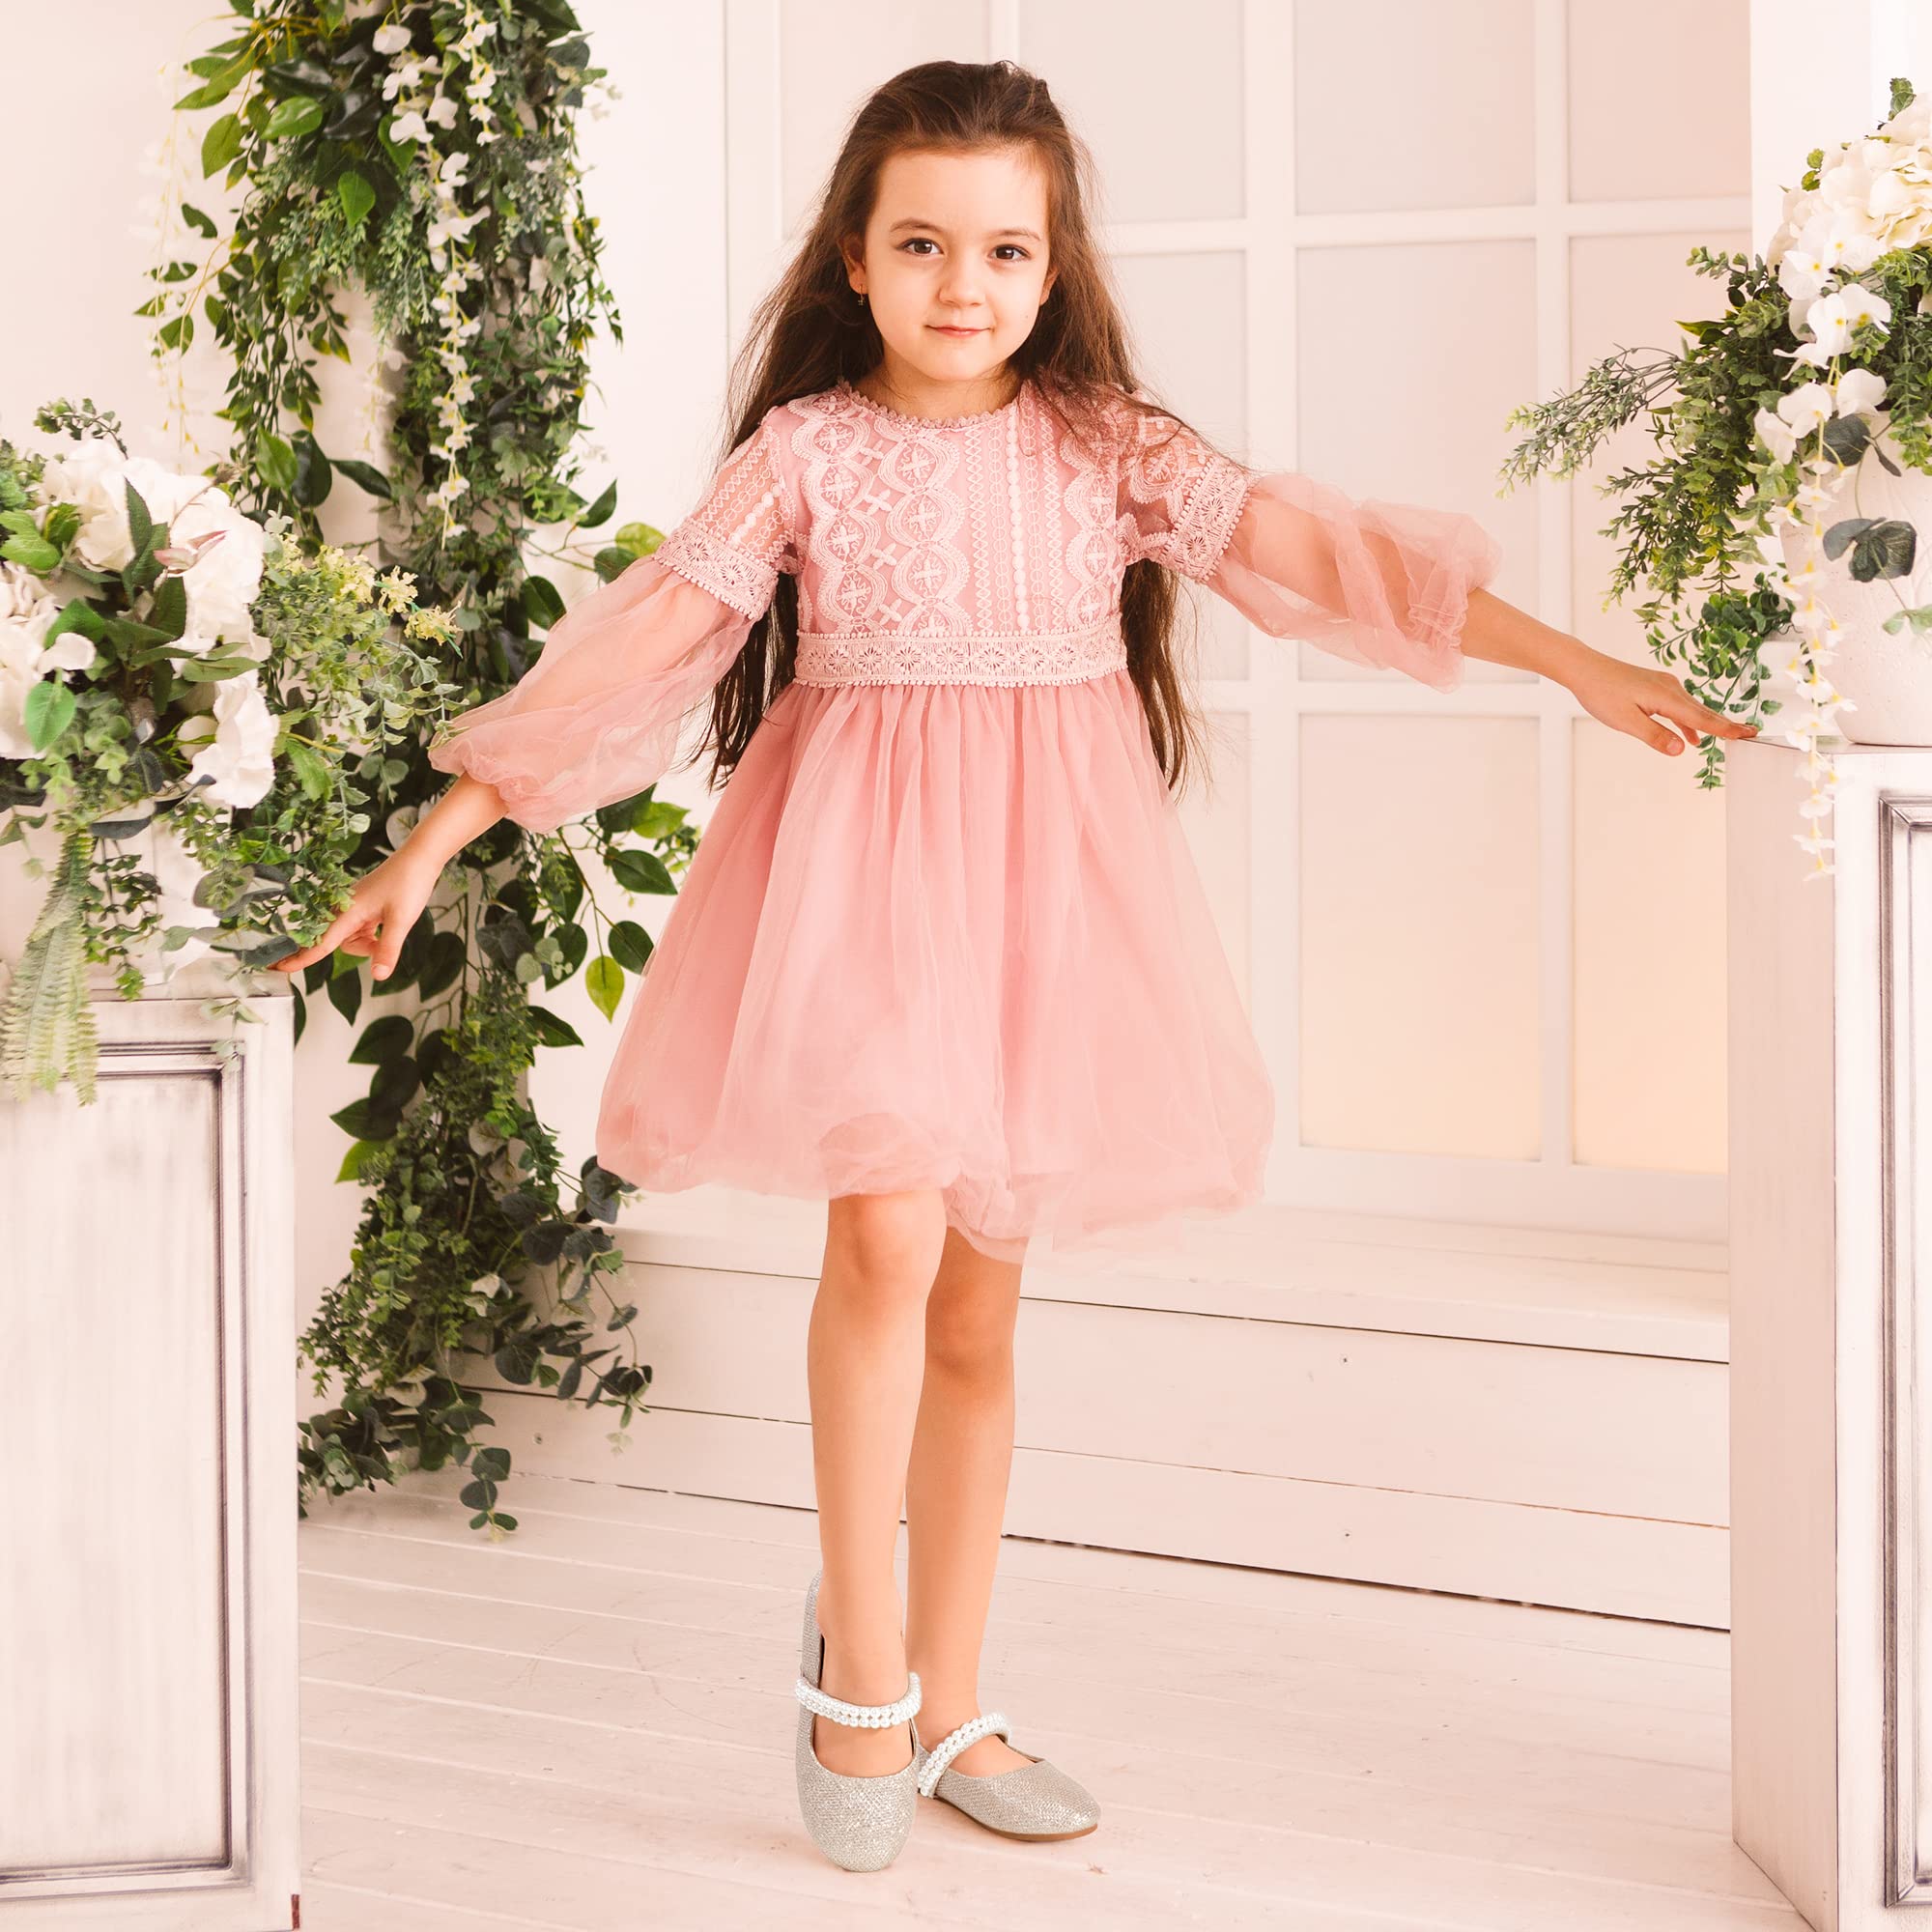 Hehainom Toddler Flower Girls Dress Shoes, Mary Jane Princess Ballet Flats with Bow and Peals for Party School